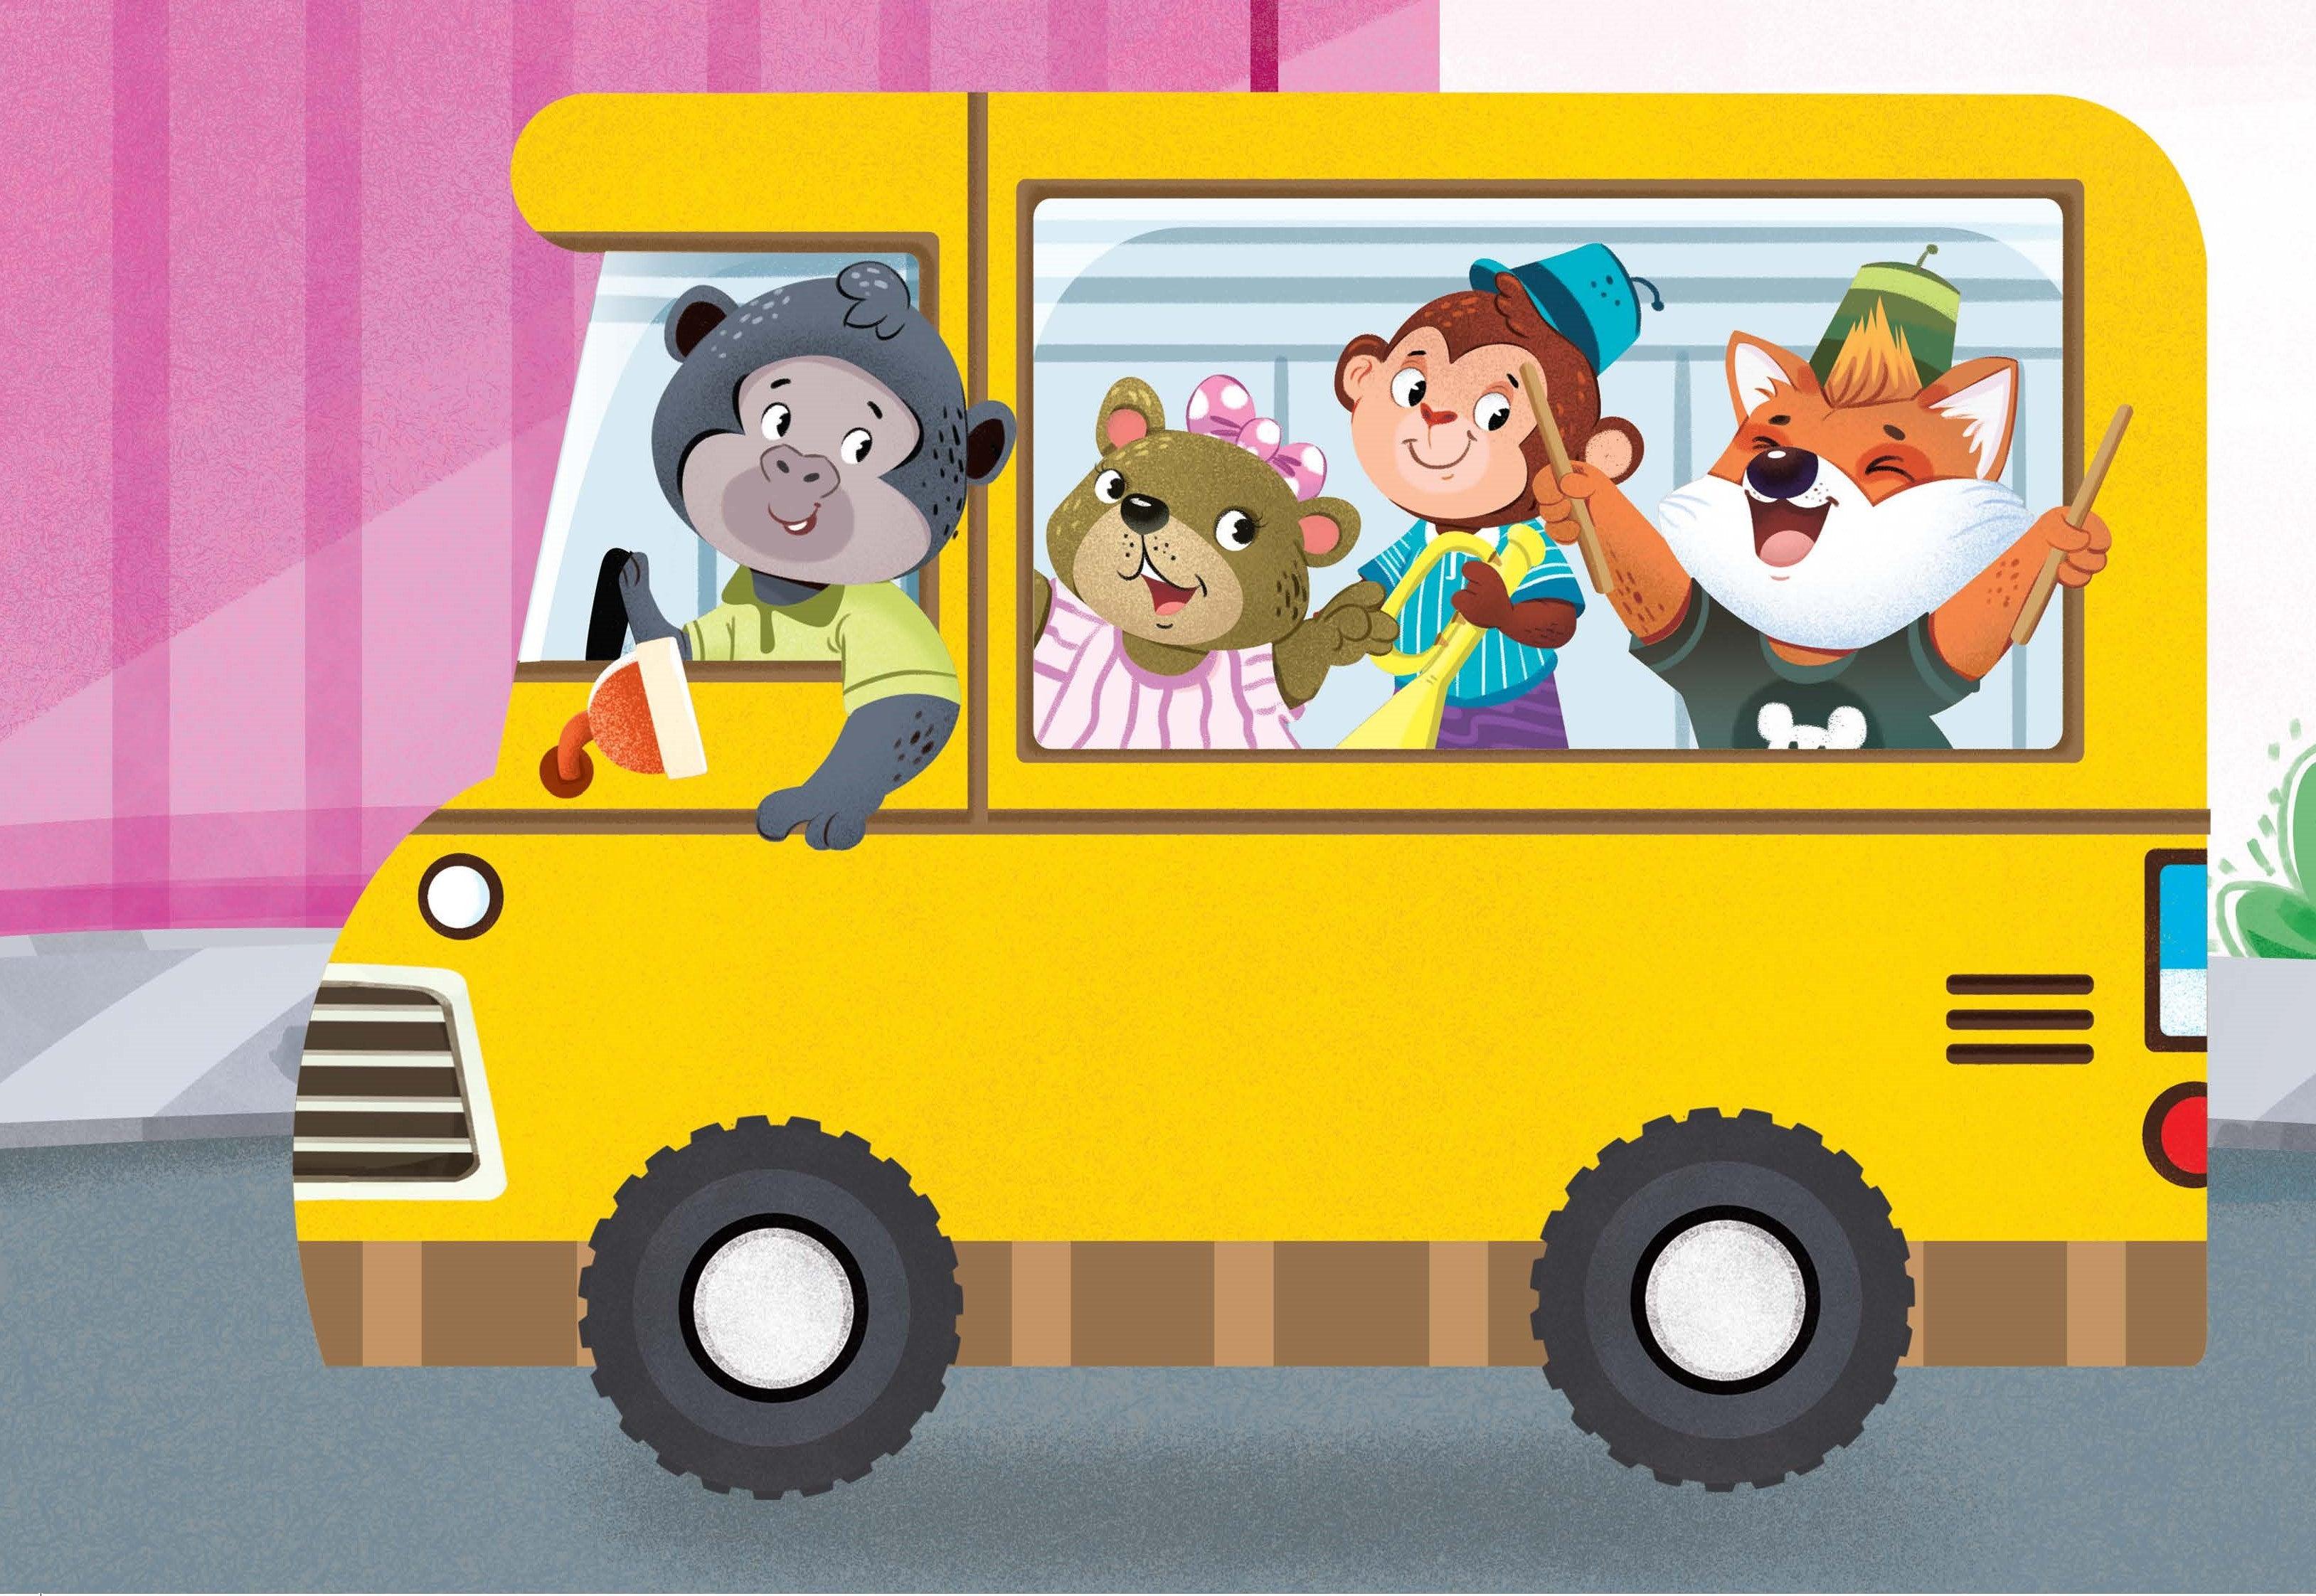 Dreamland A Music Party on the Bus - A Shaped Board book with Wheels - A Picture Book For Kids (English) - FunCorp India